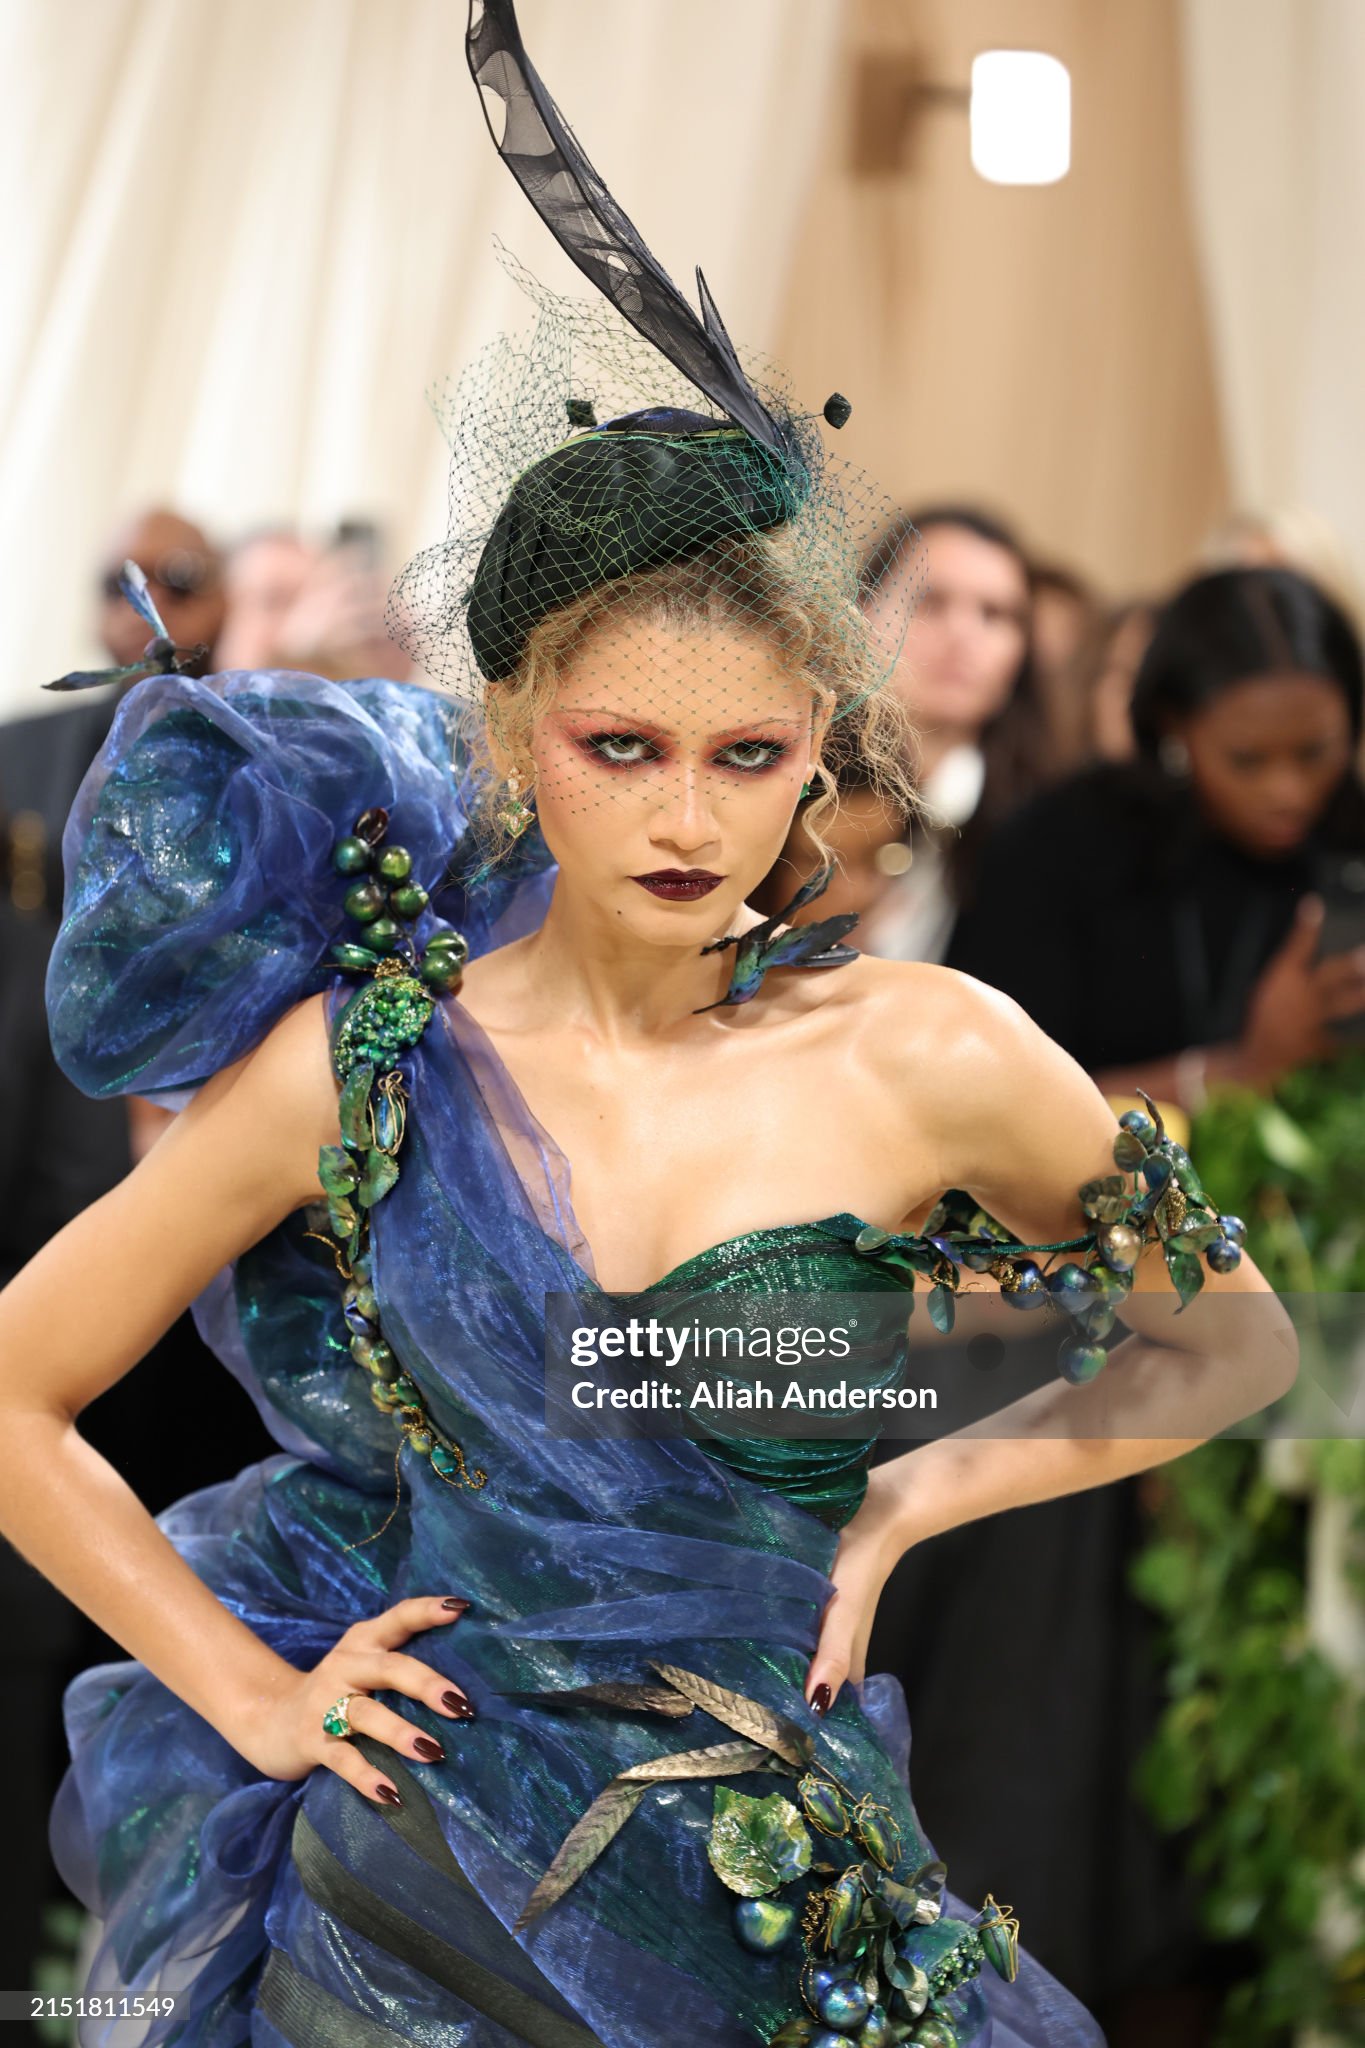 gettyimages-2151811549-2048x2048.jpg